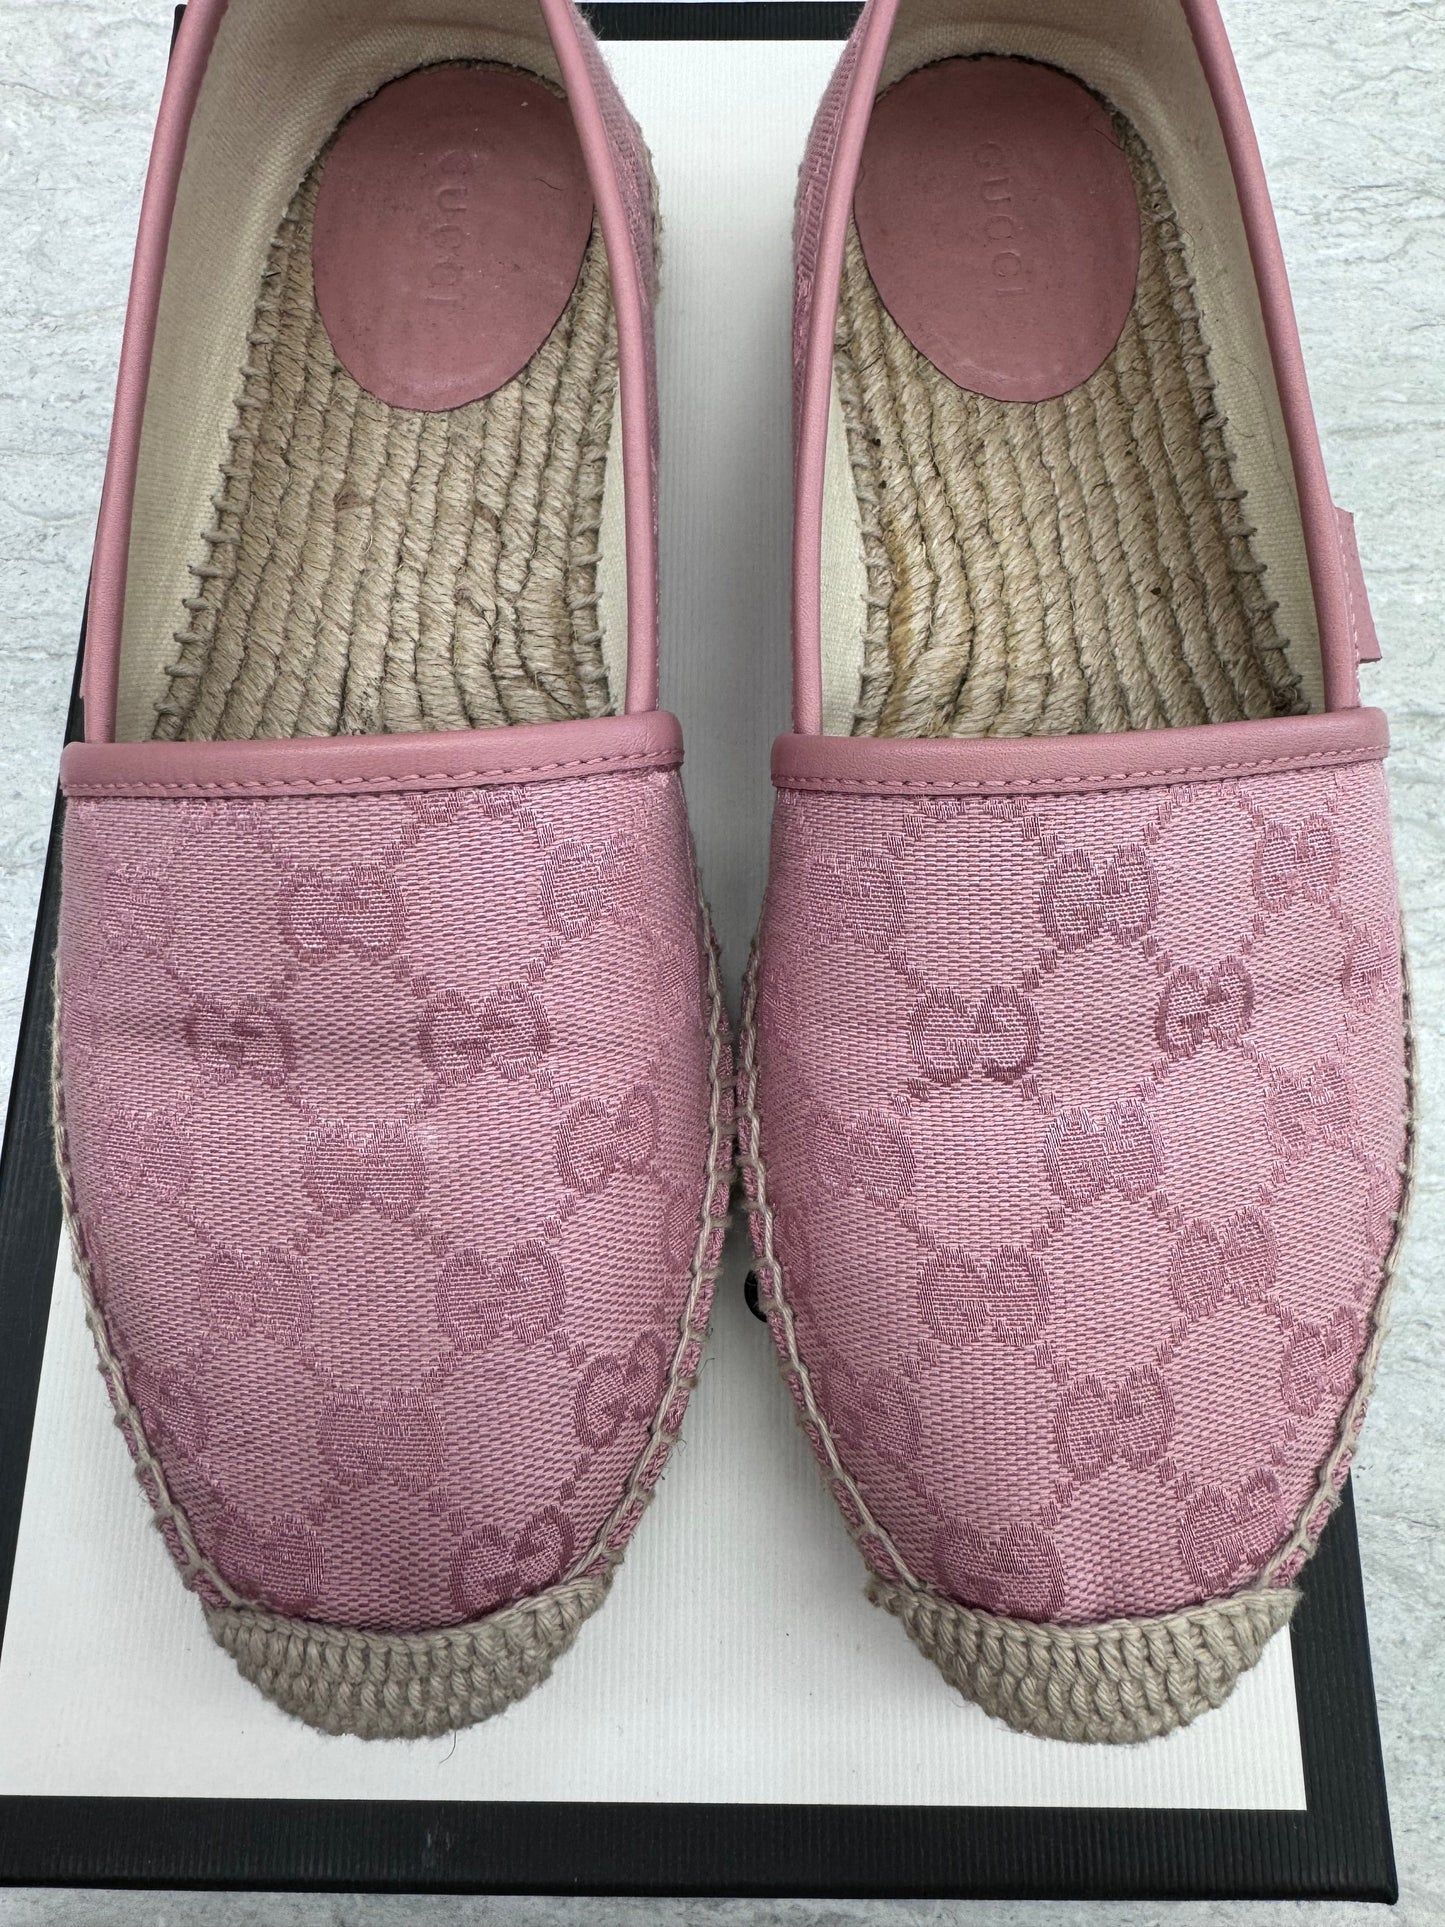 Shoes Luxury Designer By Gucci  Size: 6.5